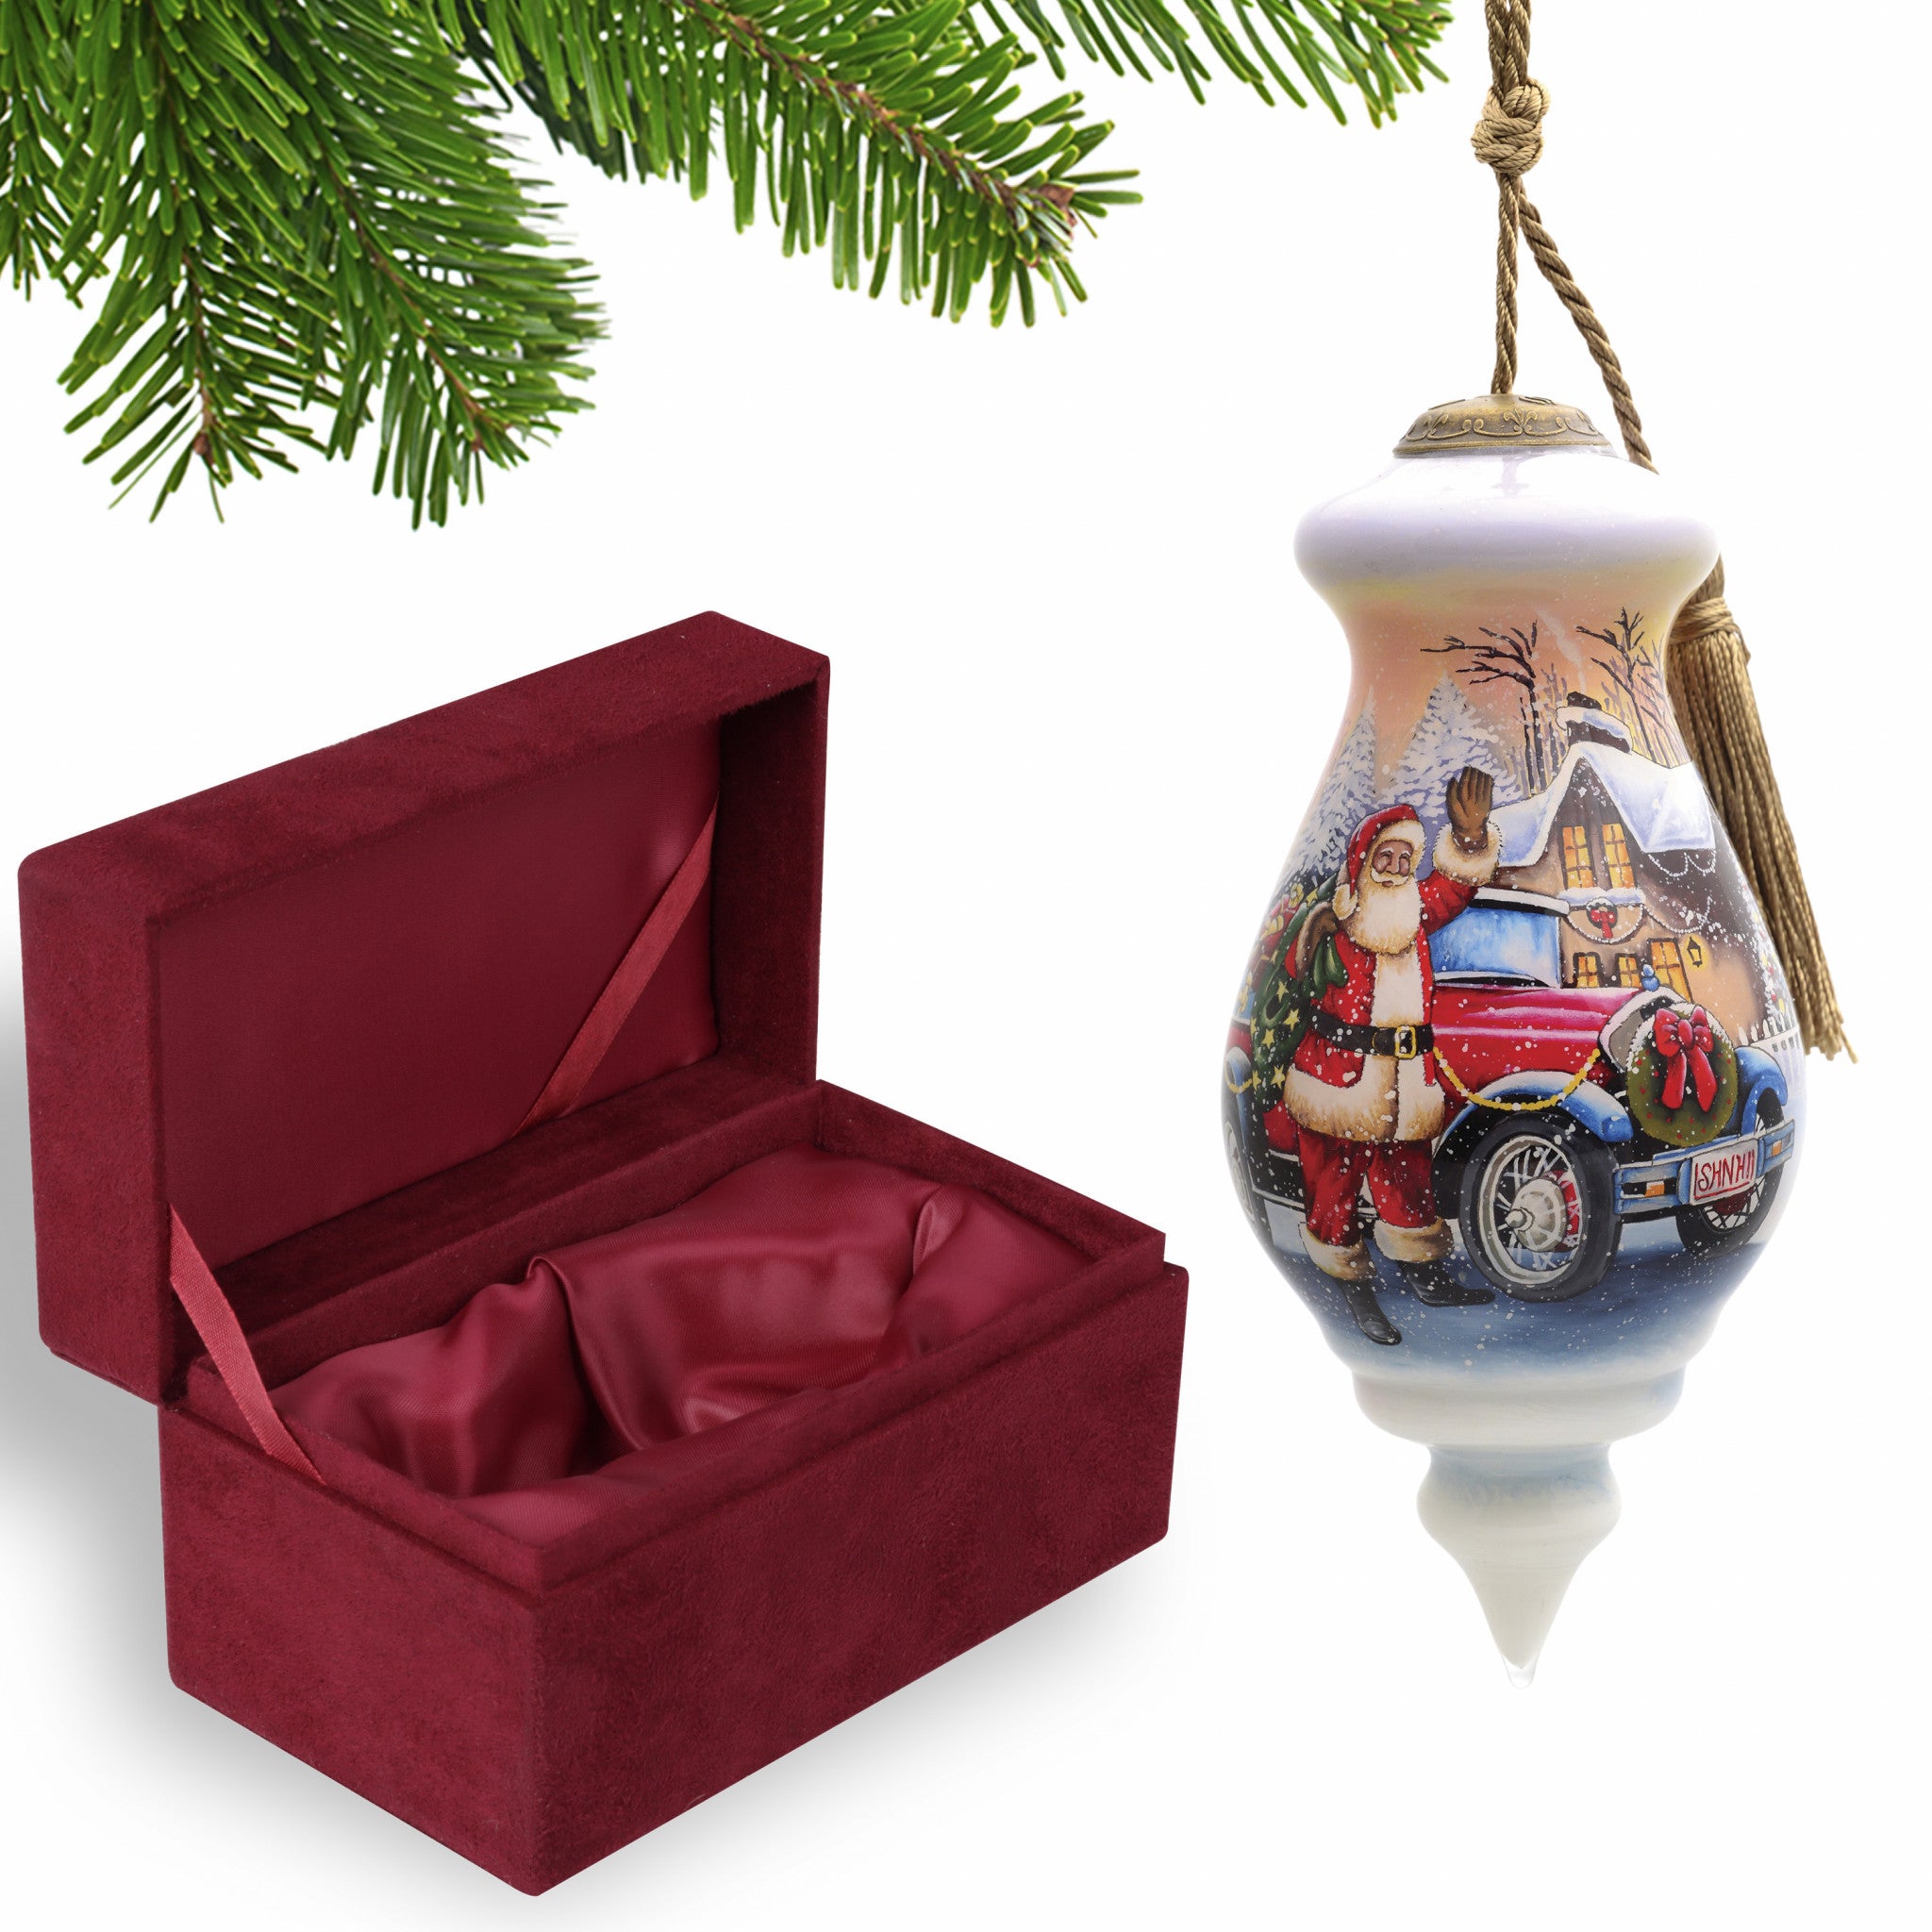 Vintage-Car-and-Santa-Waving-Hand-Painted-Mouth-Blown-Glass-Ornament-Christmas-Ornaments